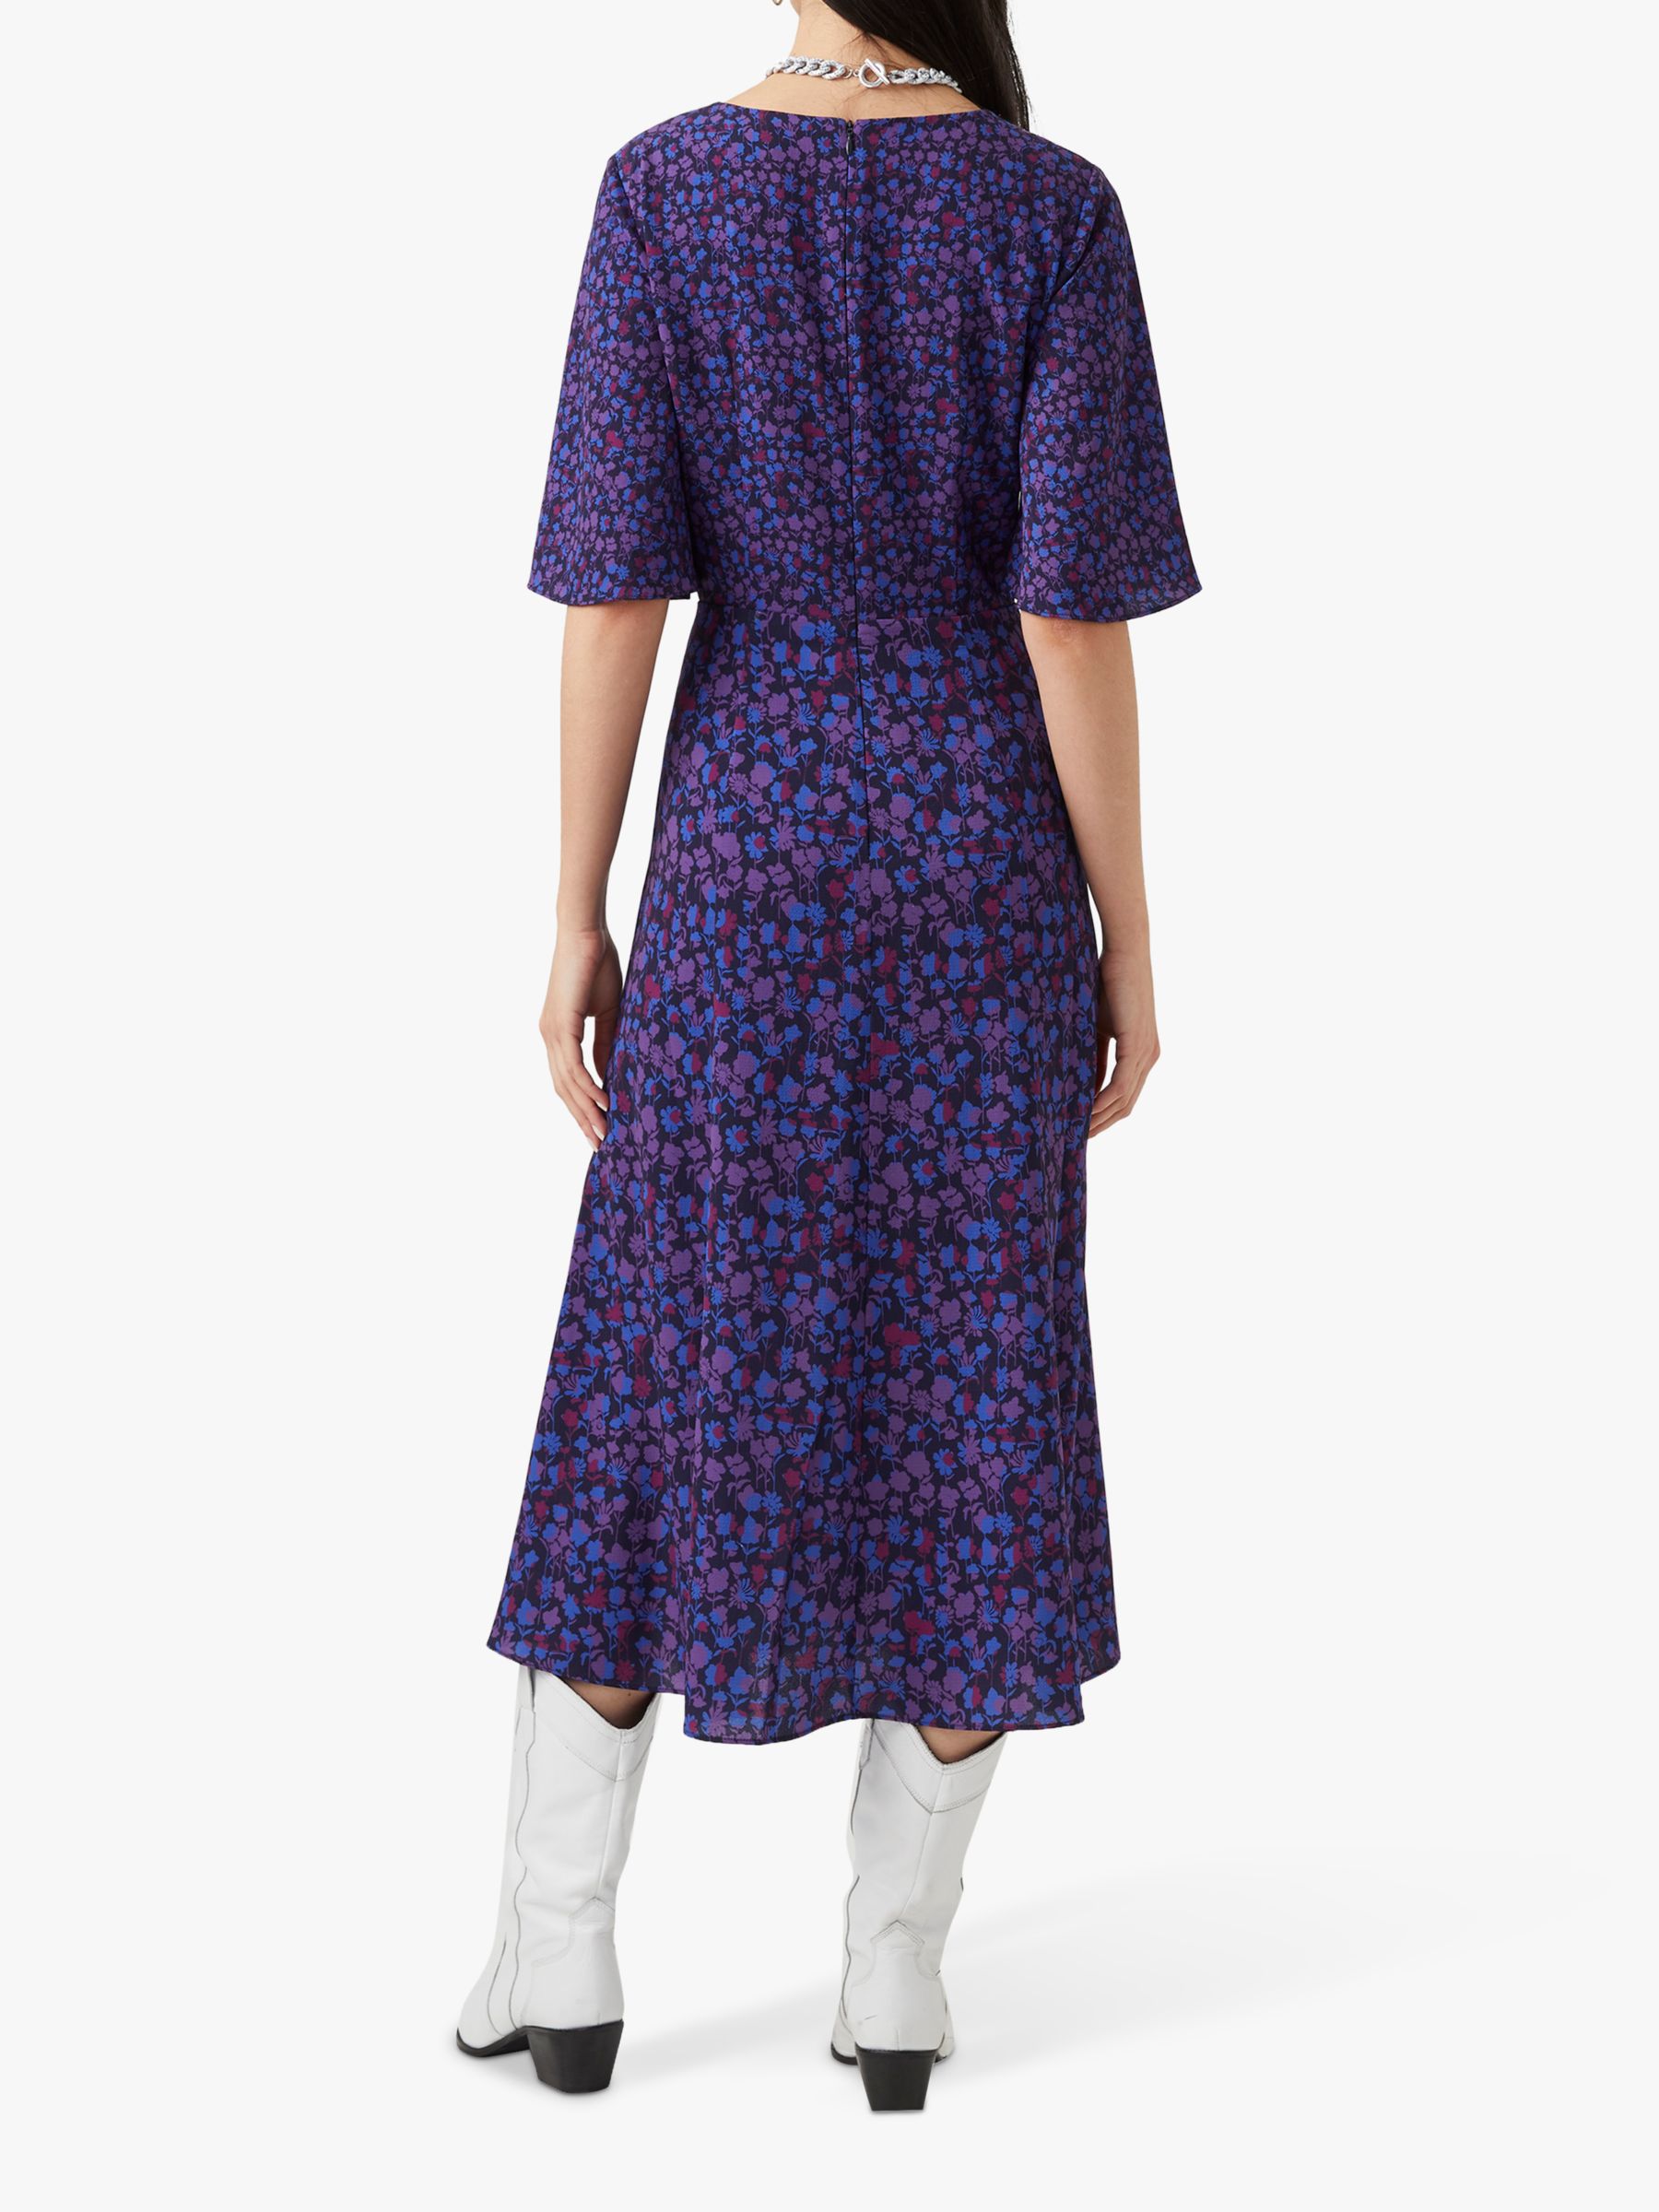 French Connection Bethanie Verona Floral Midi Dress, Dazzling Blue/Multi